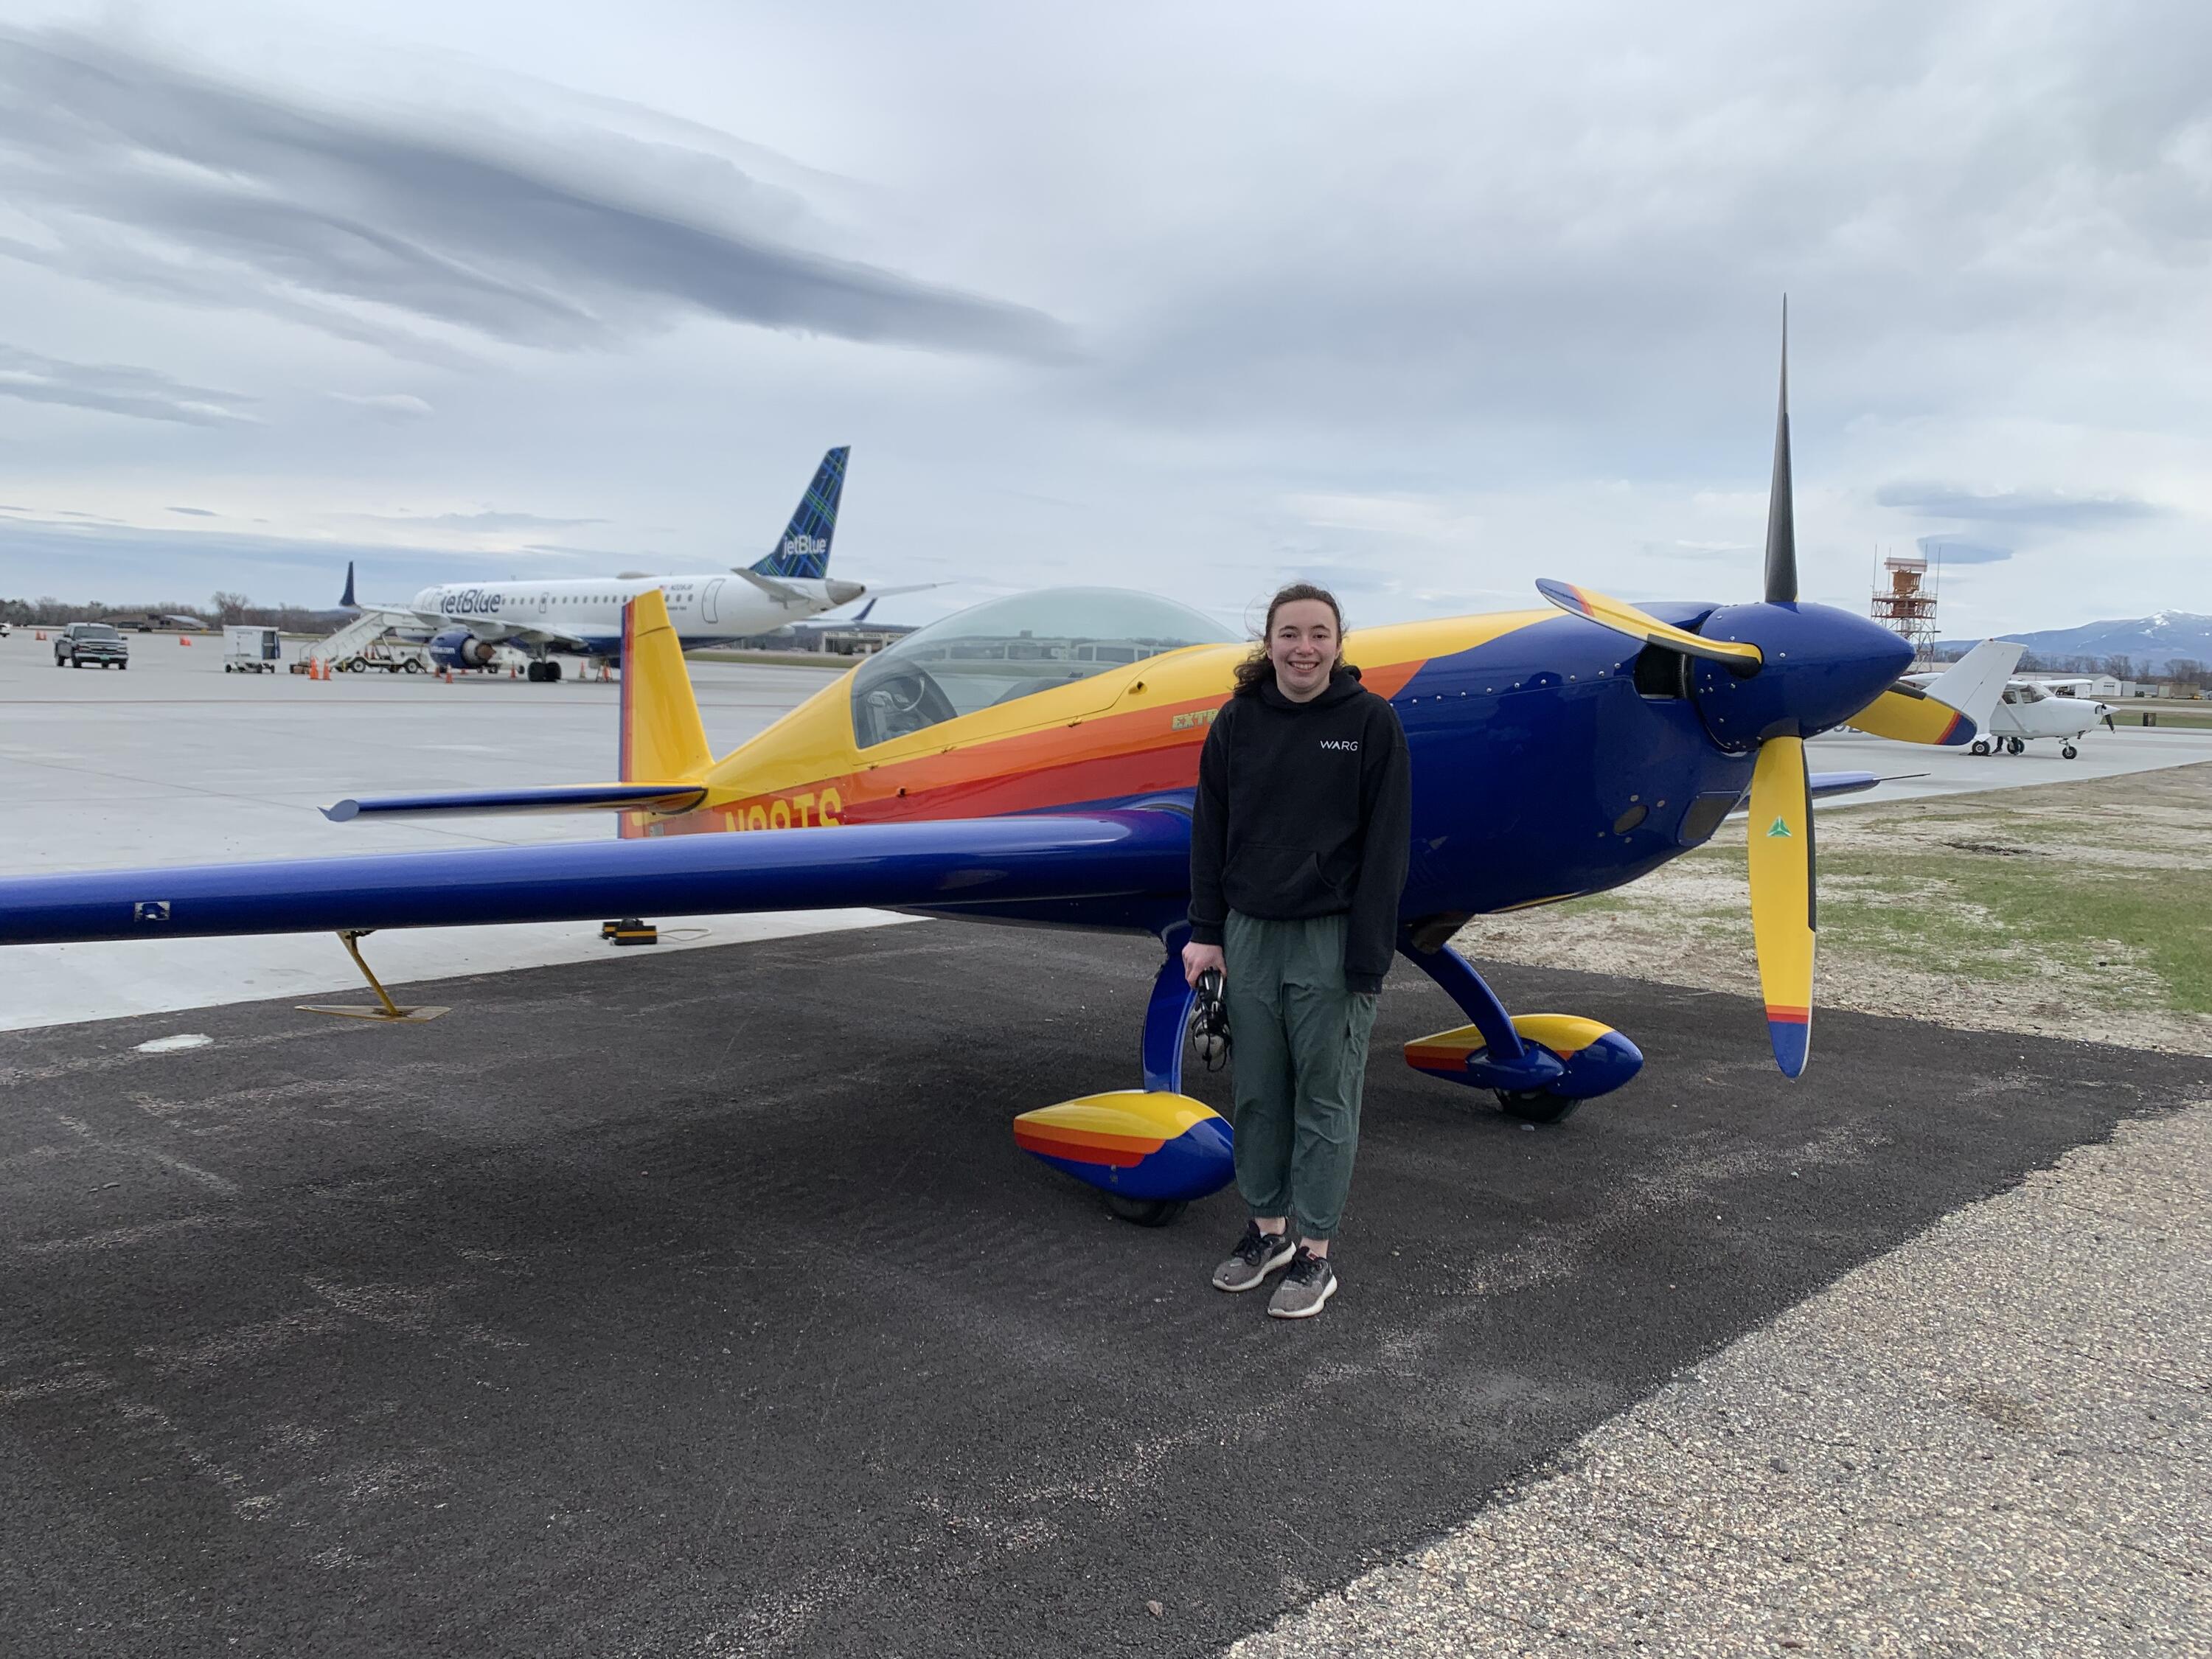 Brielle standing in front of a small, grounded, colourful plane